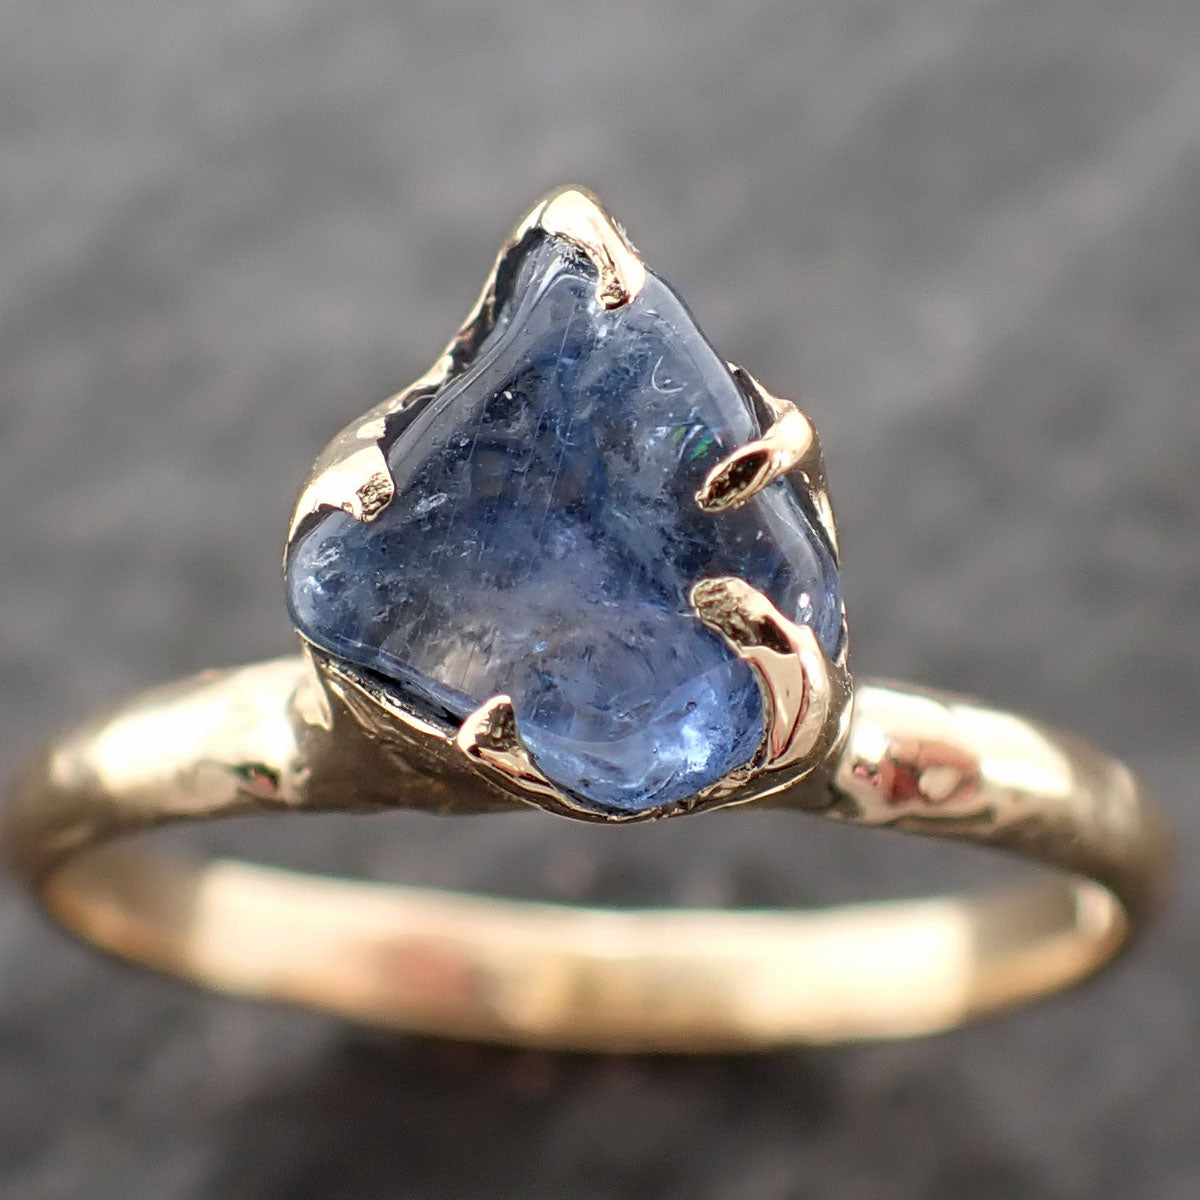 Sapphire Pebble candy blue polished 18k yellow gold Solitaire gemstone ring 2636